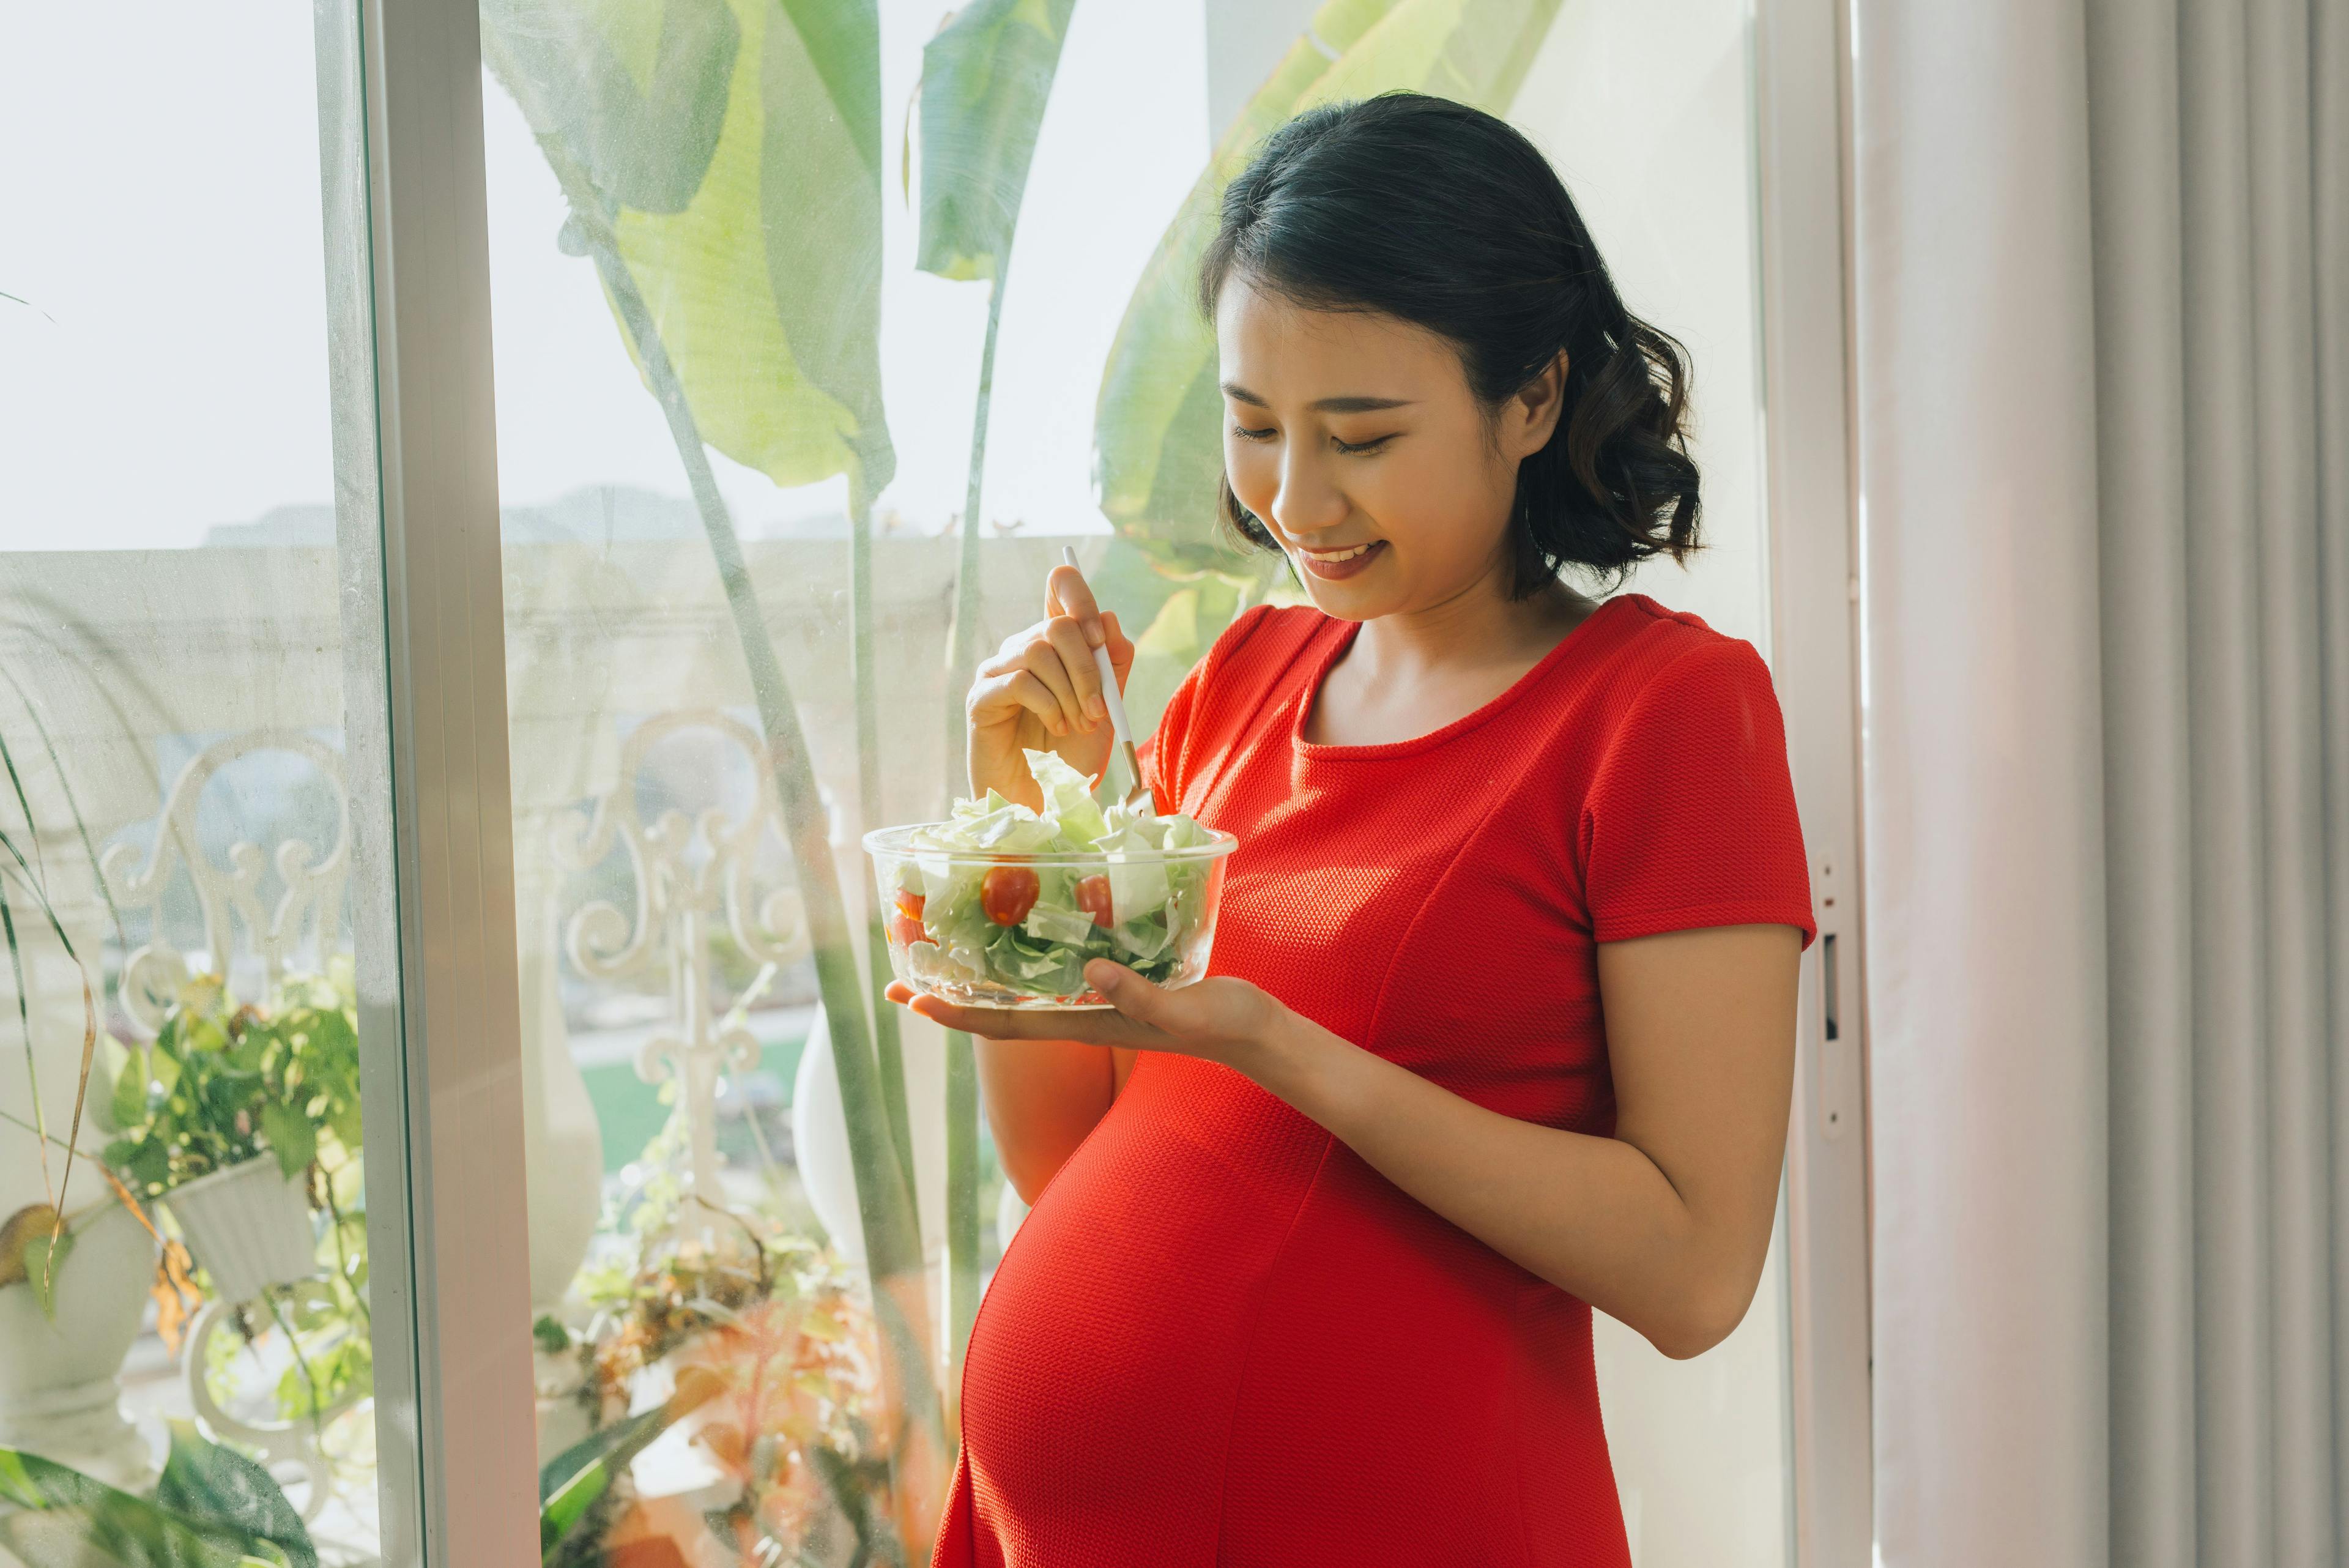 How changes in diet can manage gestational diabetes